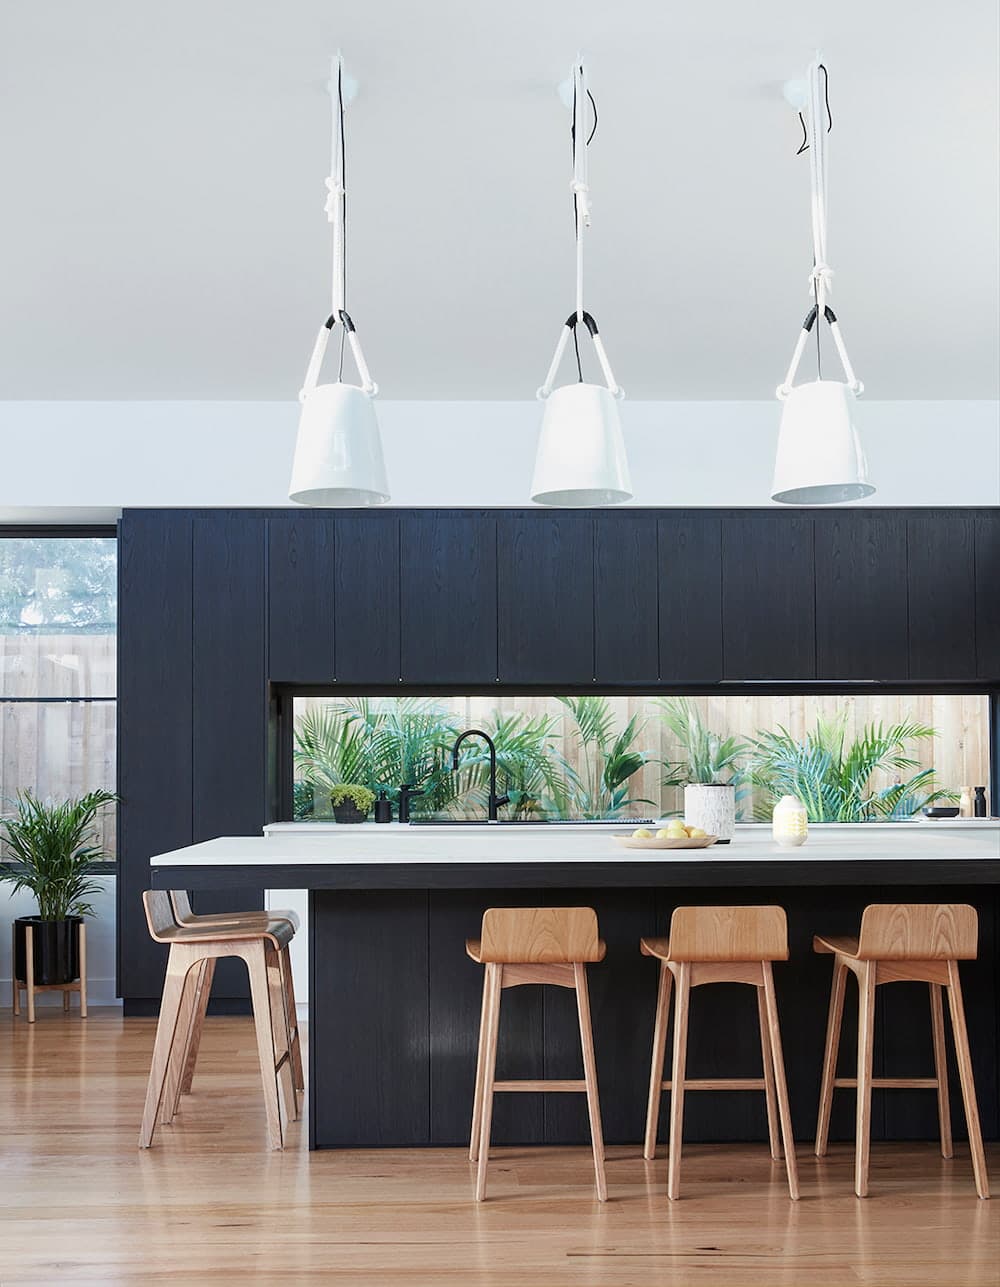 Australian home design in 2021 reshaped by COVID